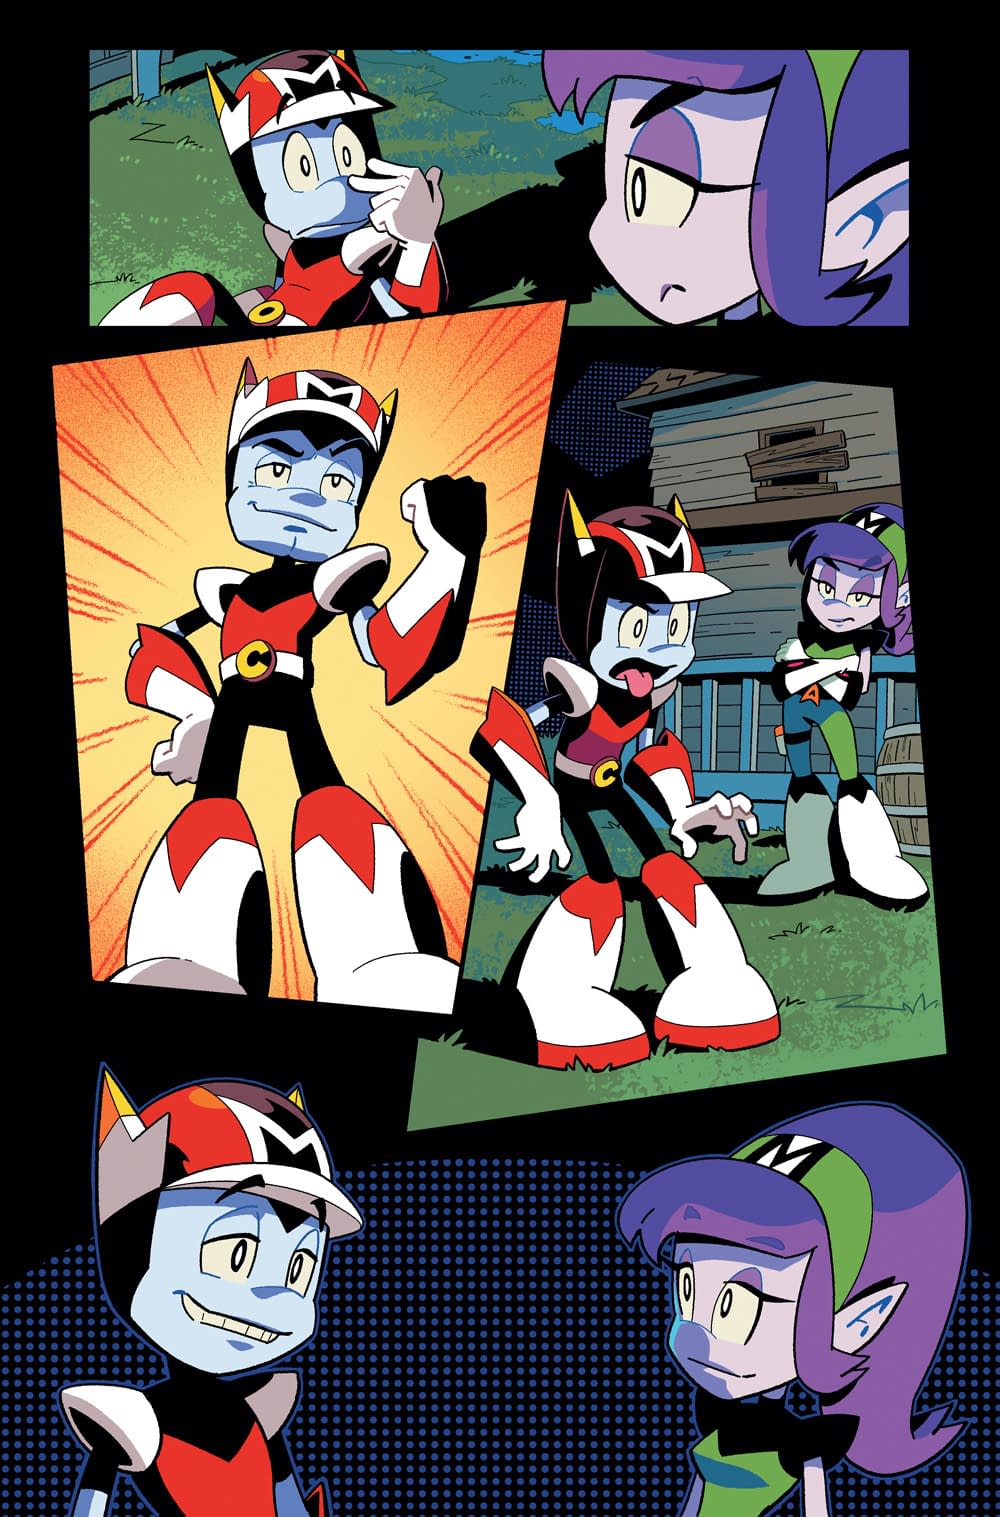 FOC Preview of Cosmo the Mighty Martian #3